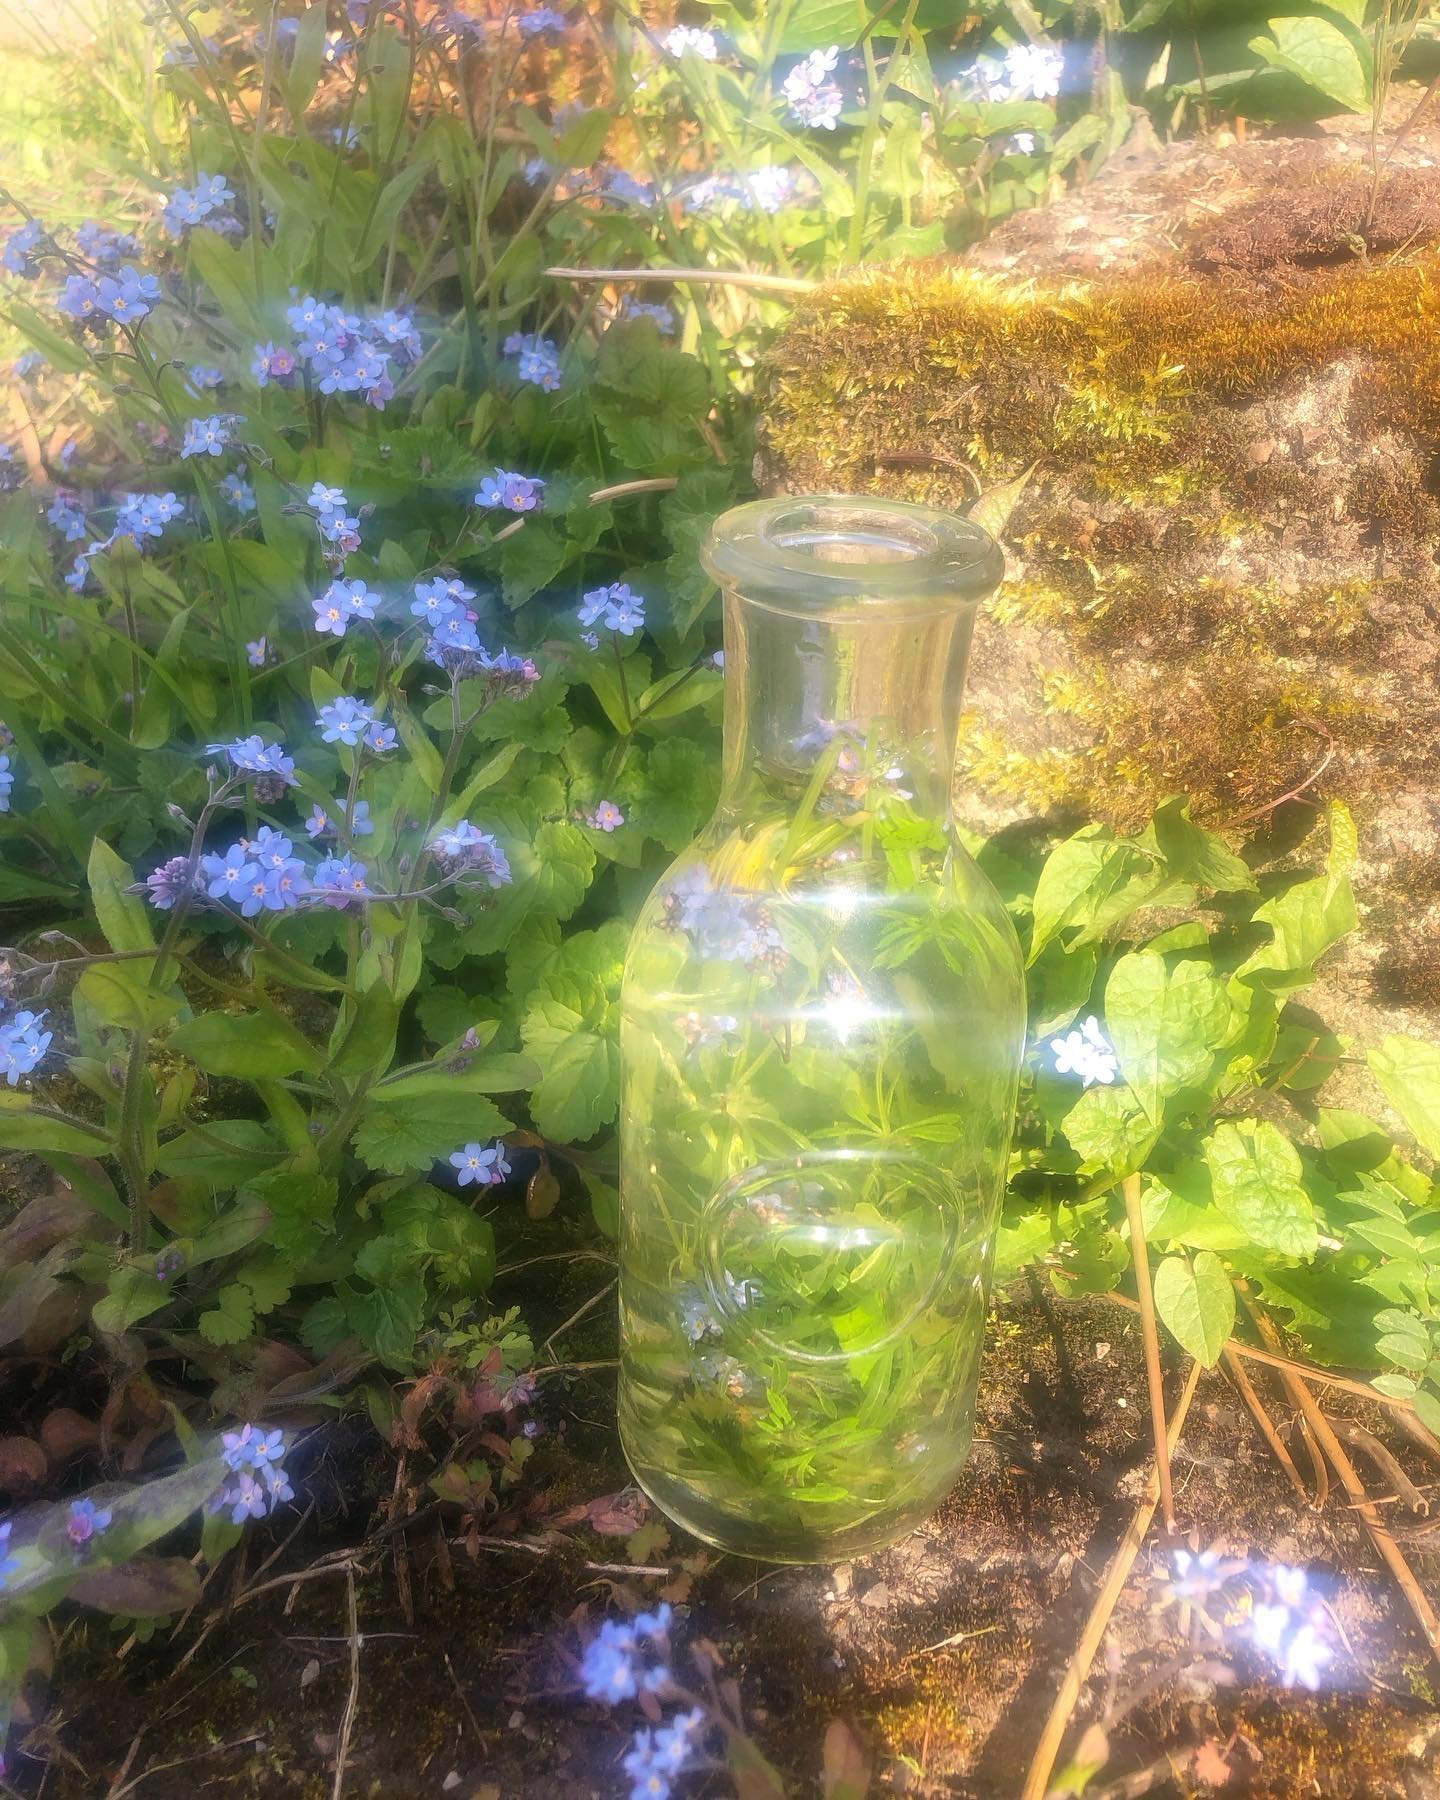 Beauty Medicine 💚🌸🌱

As the days build towards the next turn of the seasonal wheel of Beltane - May Day it is said the dew is even more potent and magical as the sun activates its alchemical healing waters 

On this Venus day take a few moments to